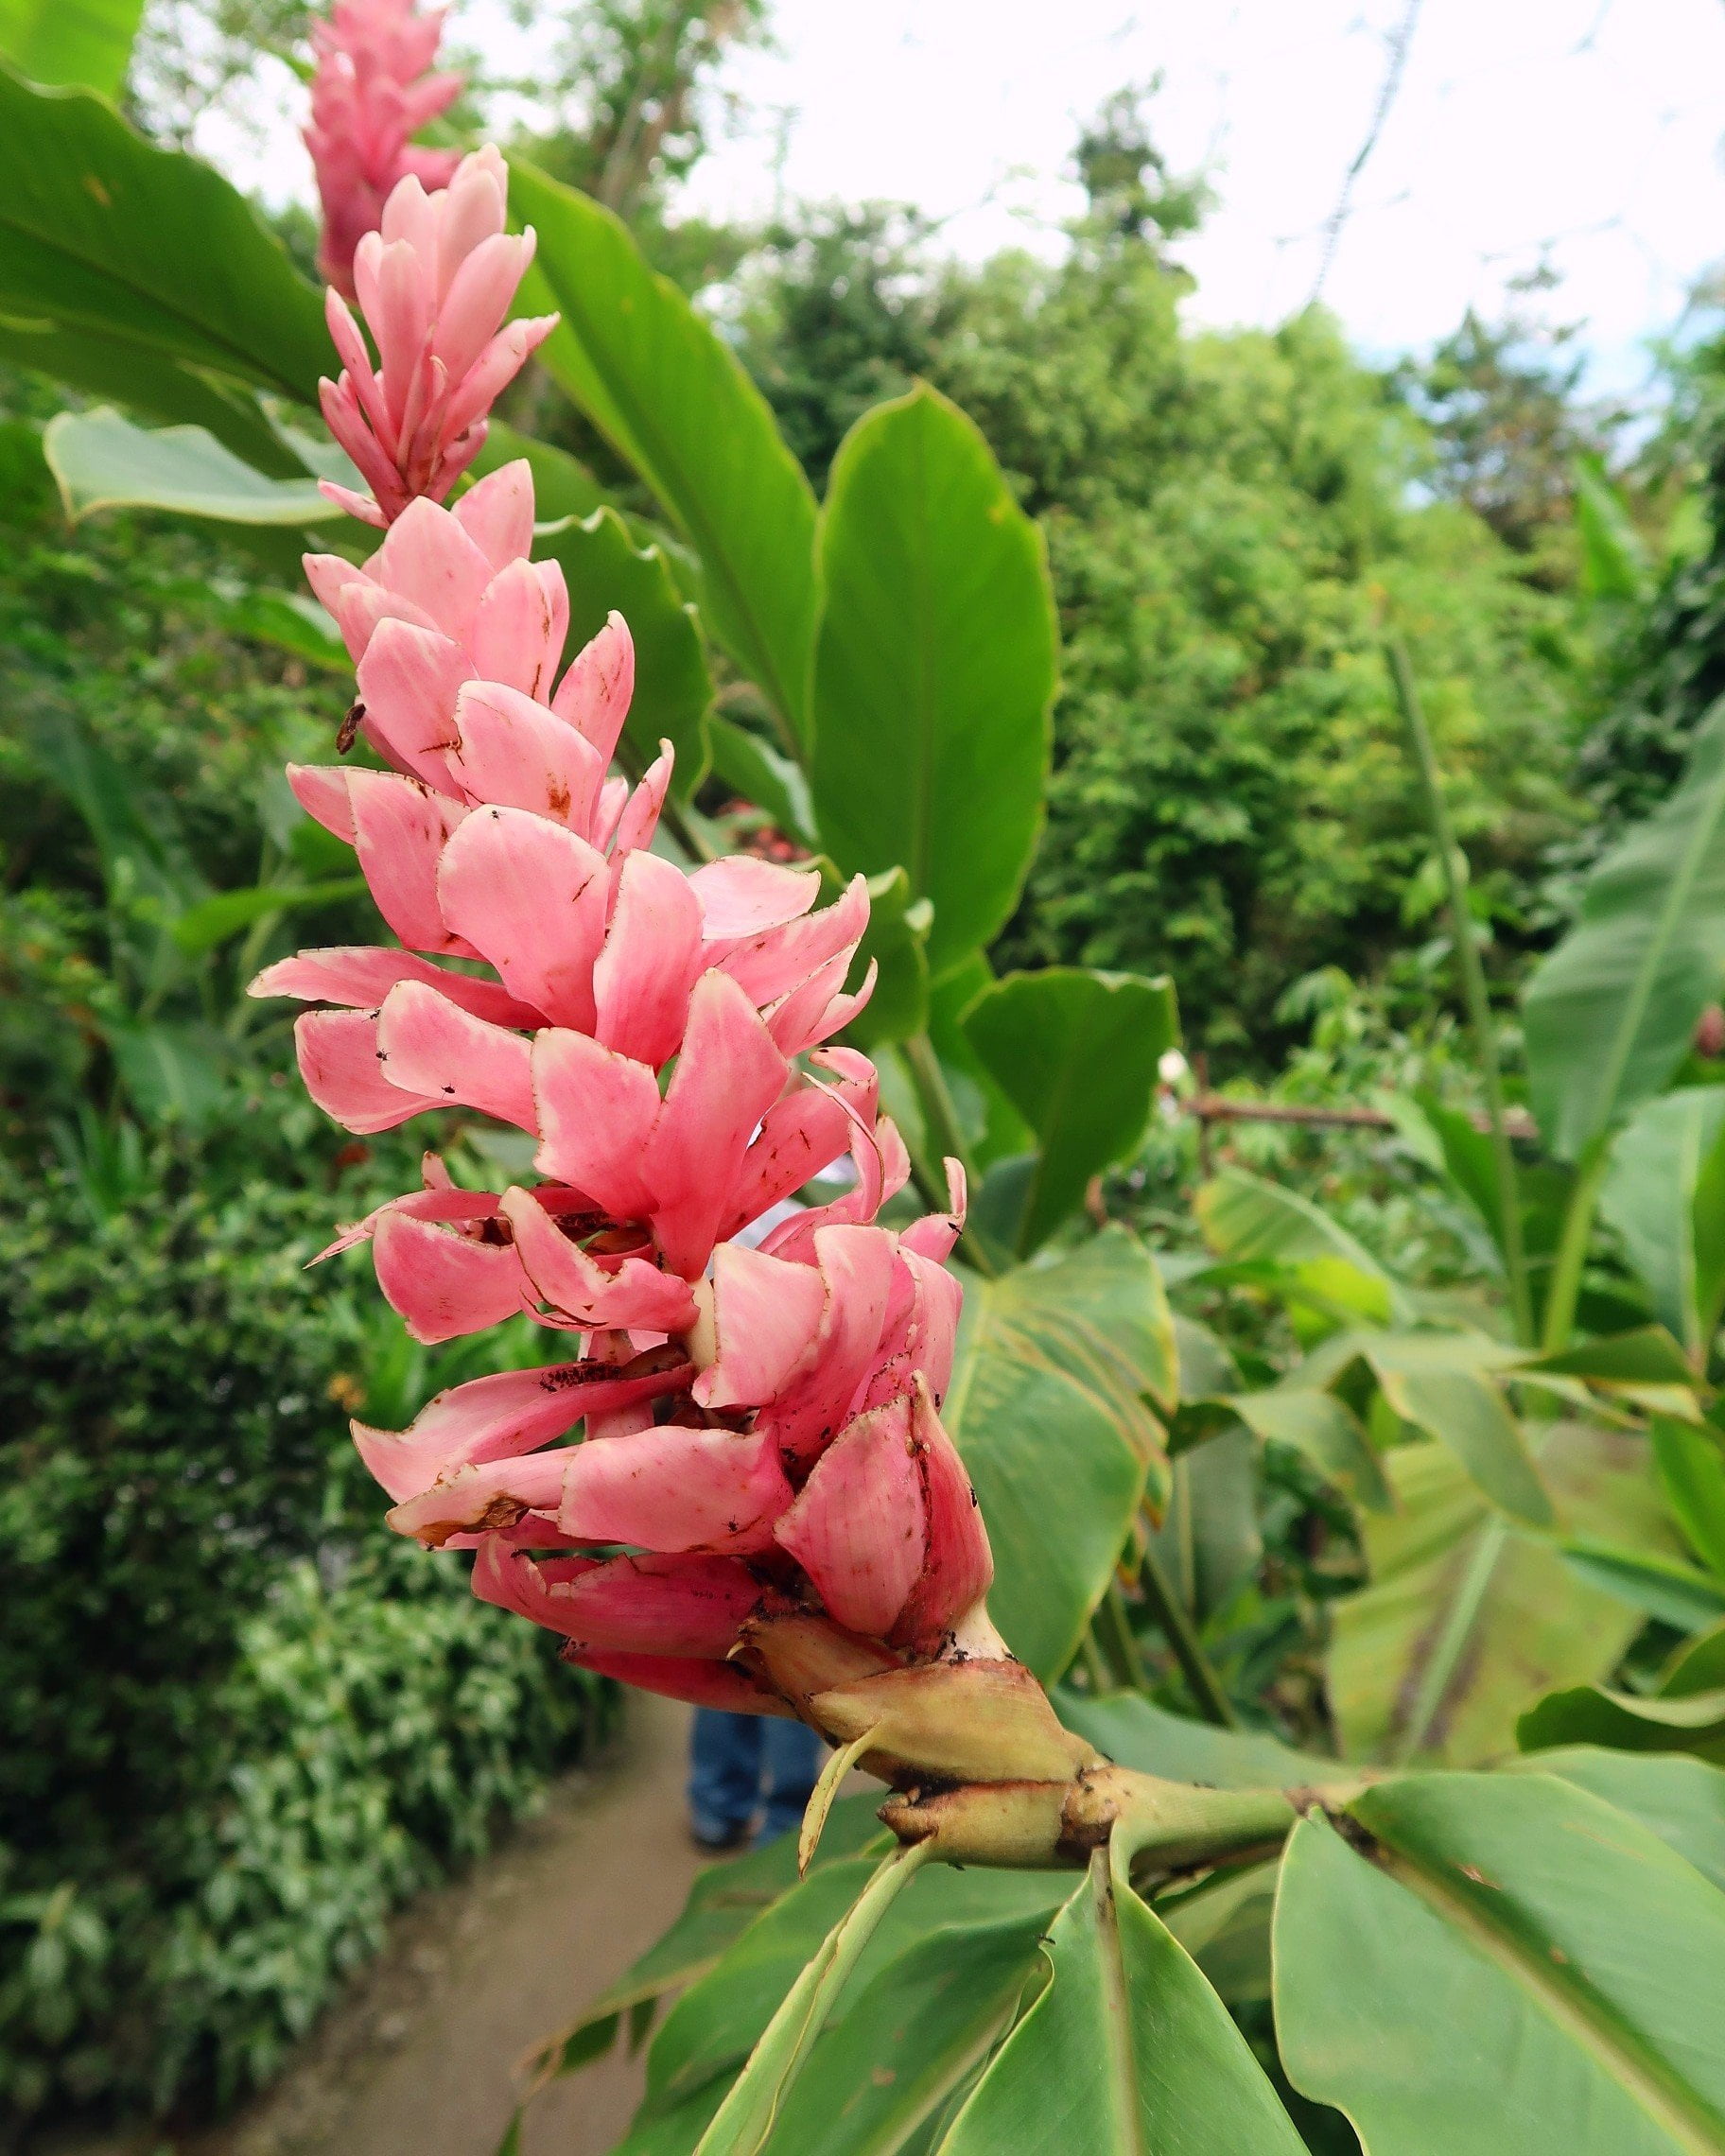 Cornwall itinerary - Eden Project pink flower 2 CREDIT Minka Guides